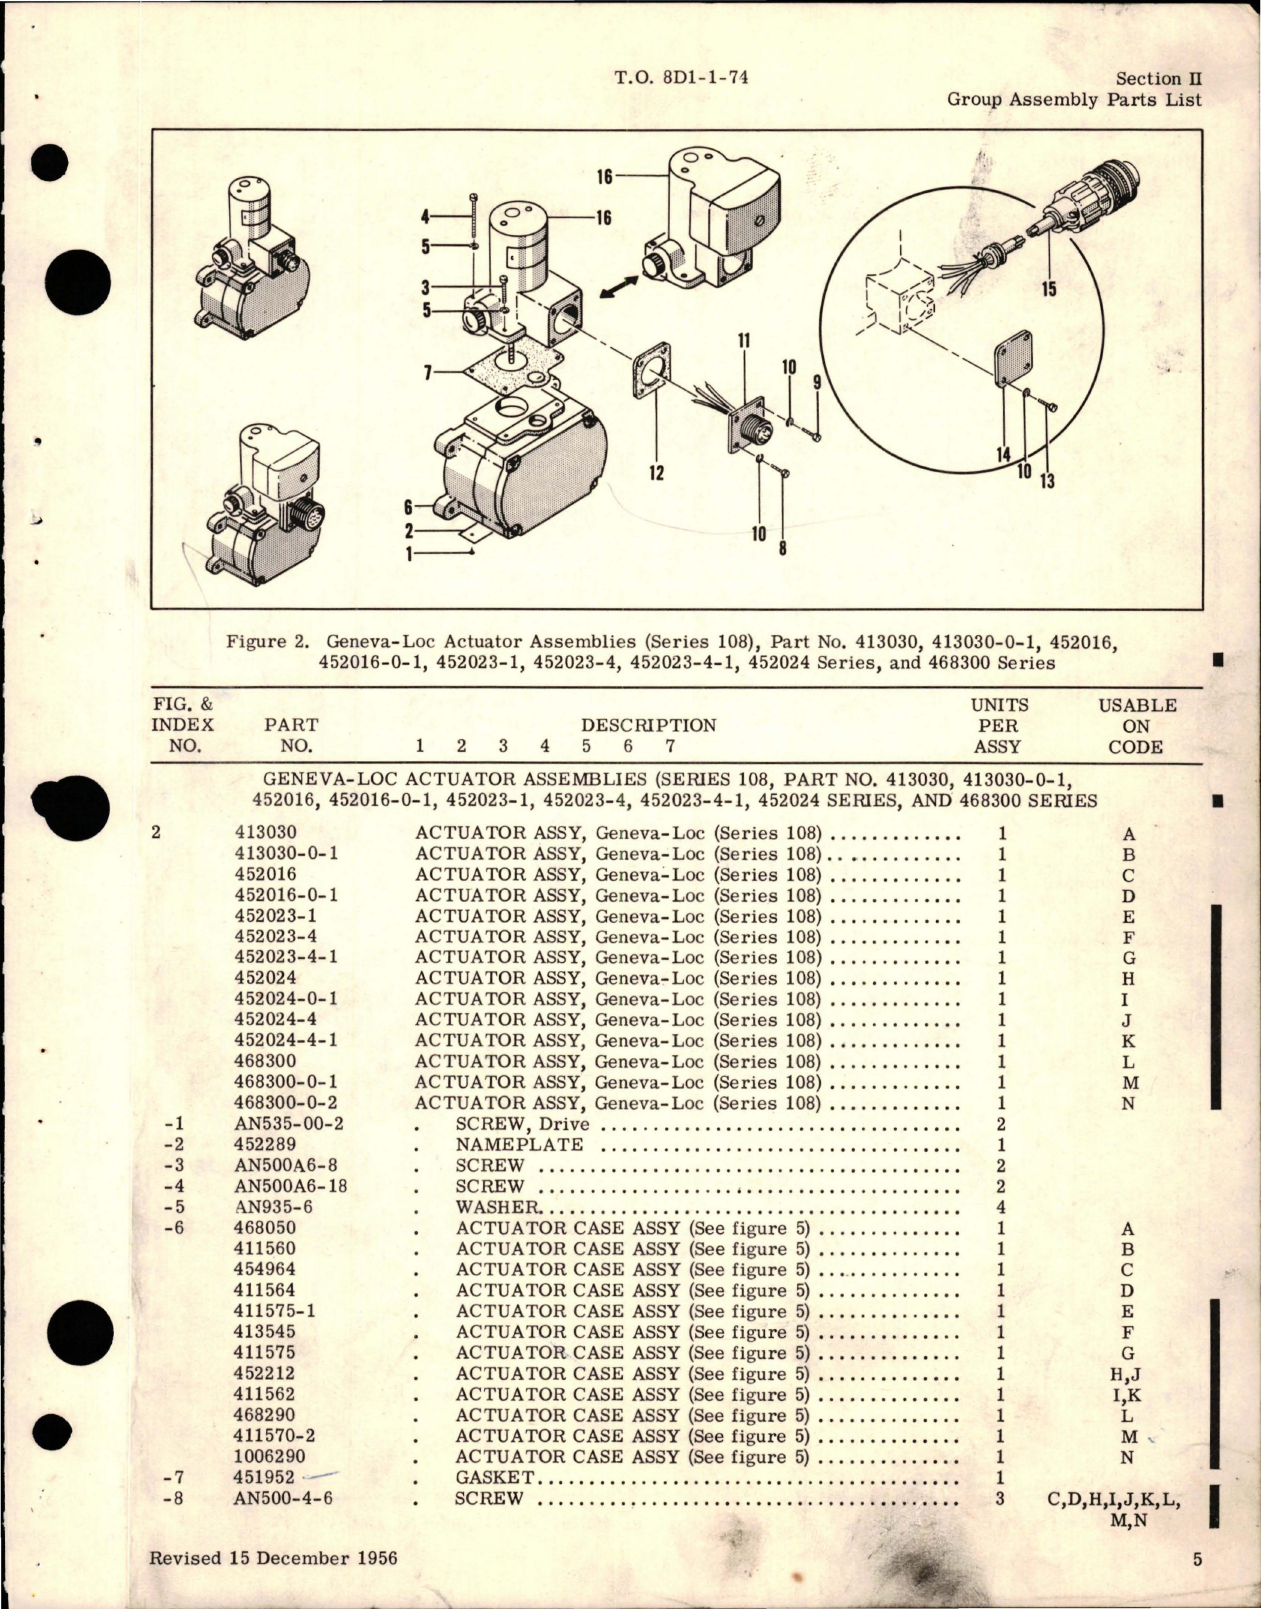 Sample page 7 from AirCorps Library document: Illustrated Parts Breakdown for Geneva-Loc Actuators - Series 108